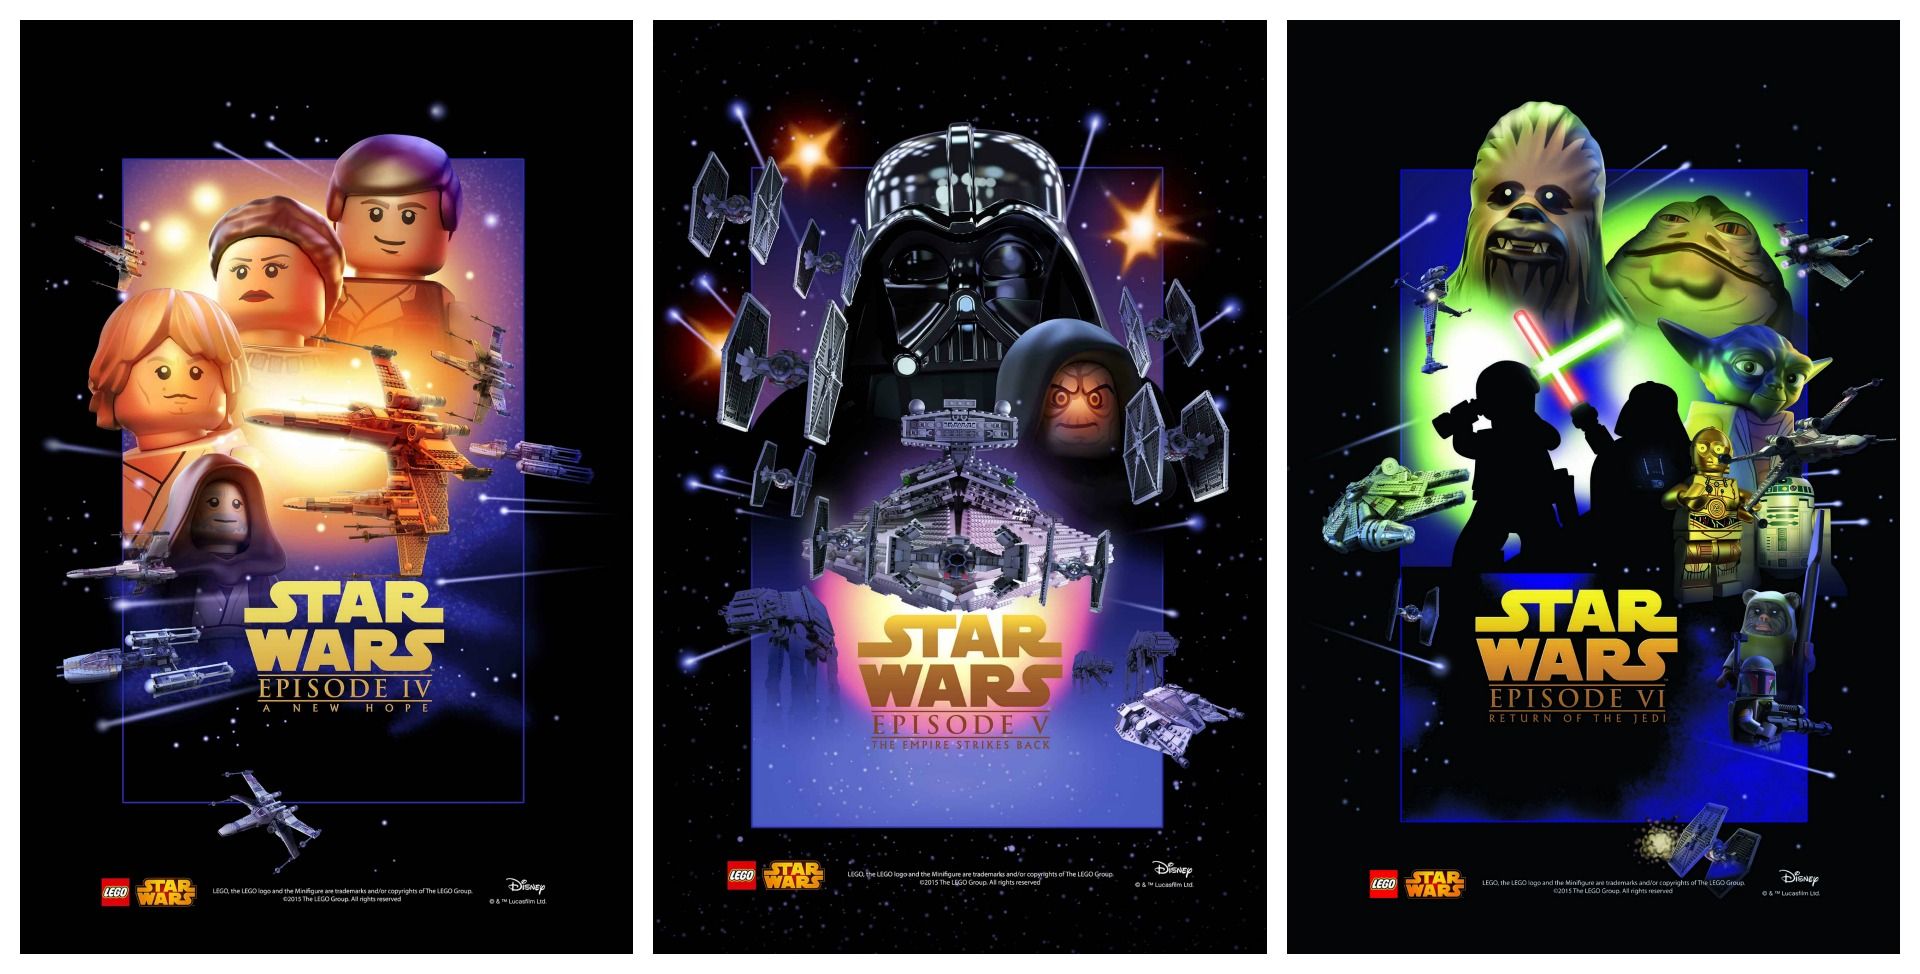 Star Wars Movie Posters Recreated in LEGO